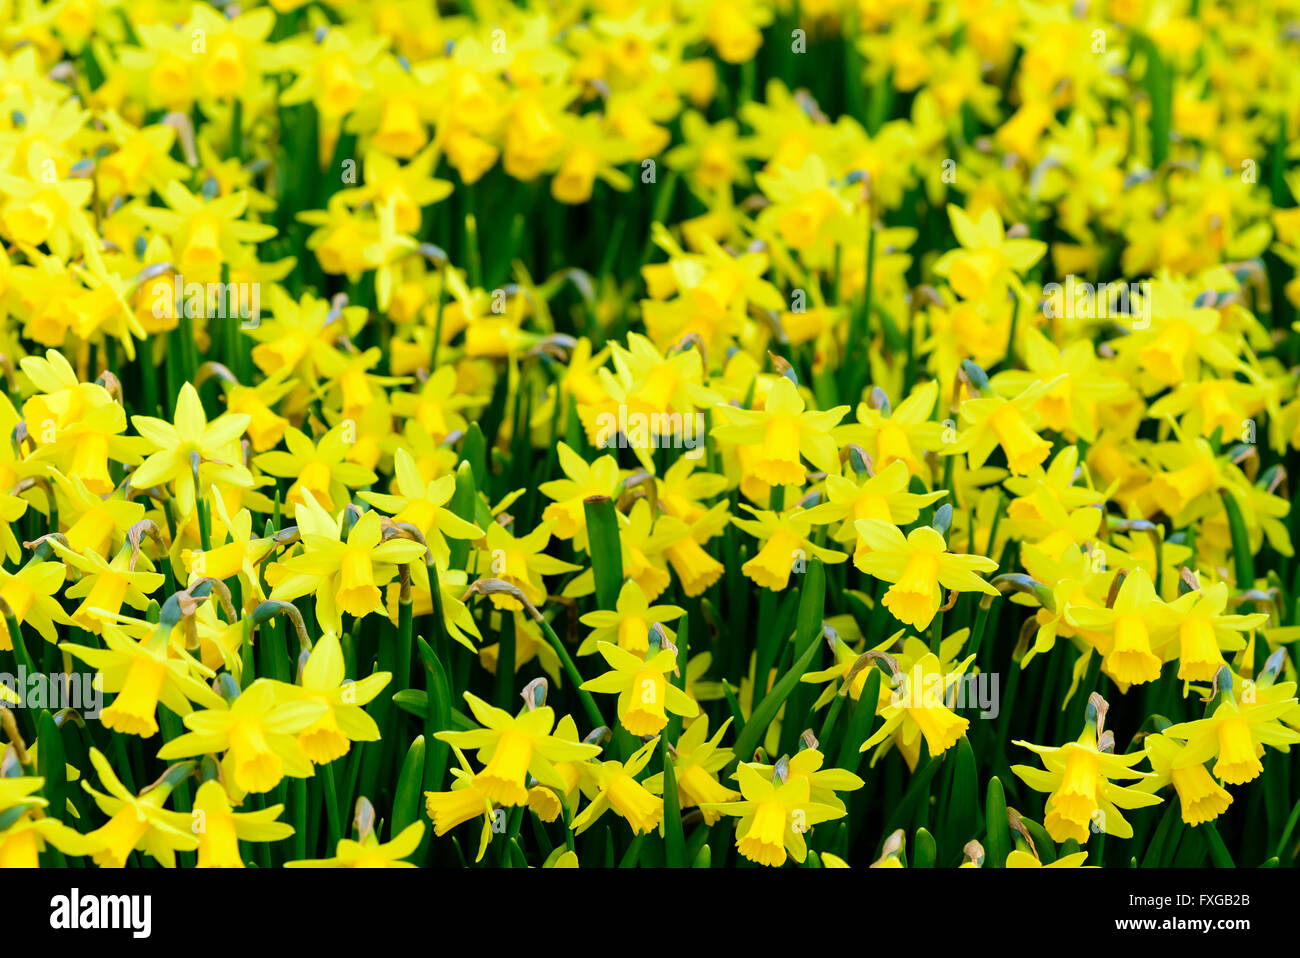 Narcissus cyclazetta commonly known as head to head daffodil. Many flower on a field. Stock Photo